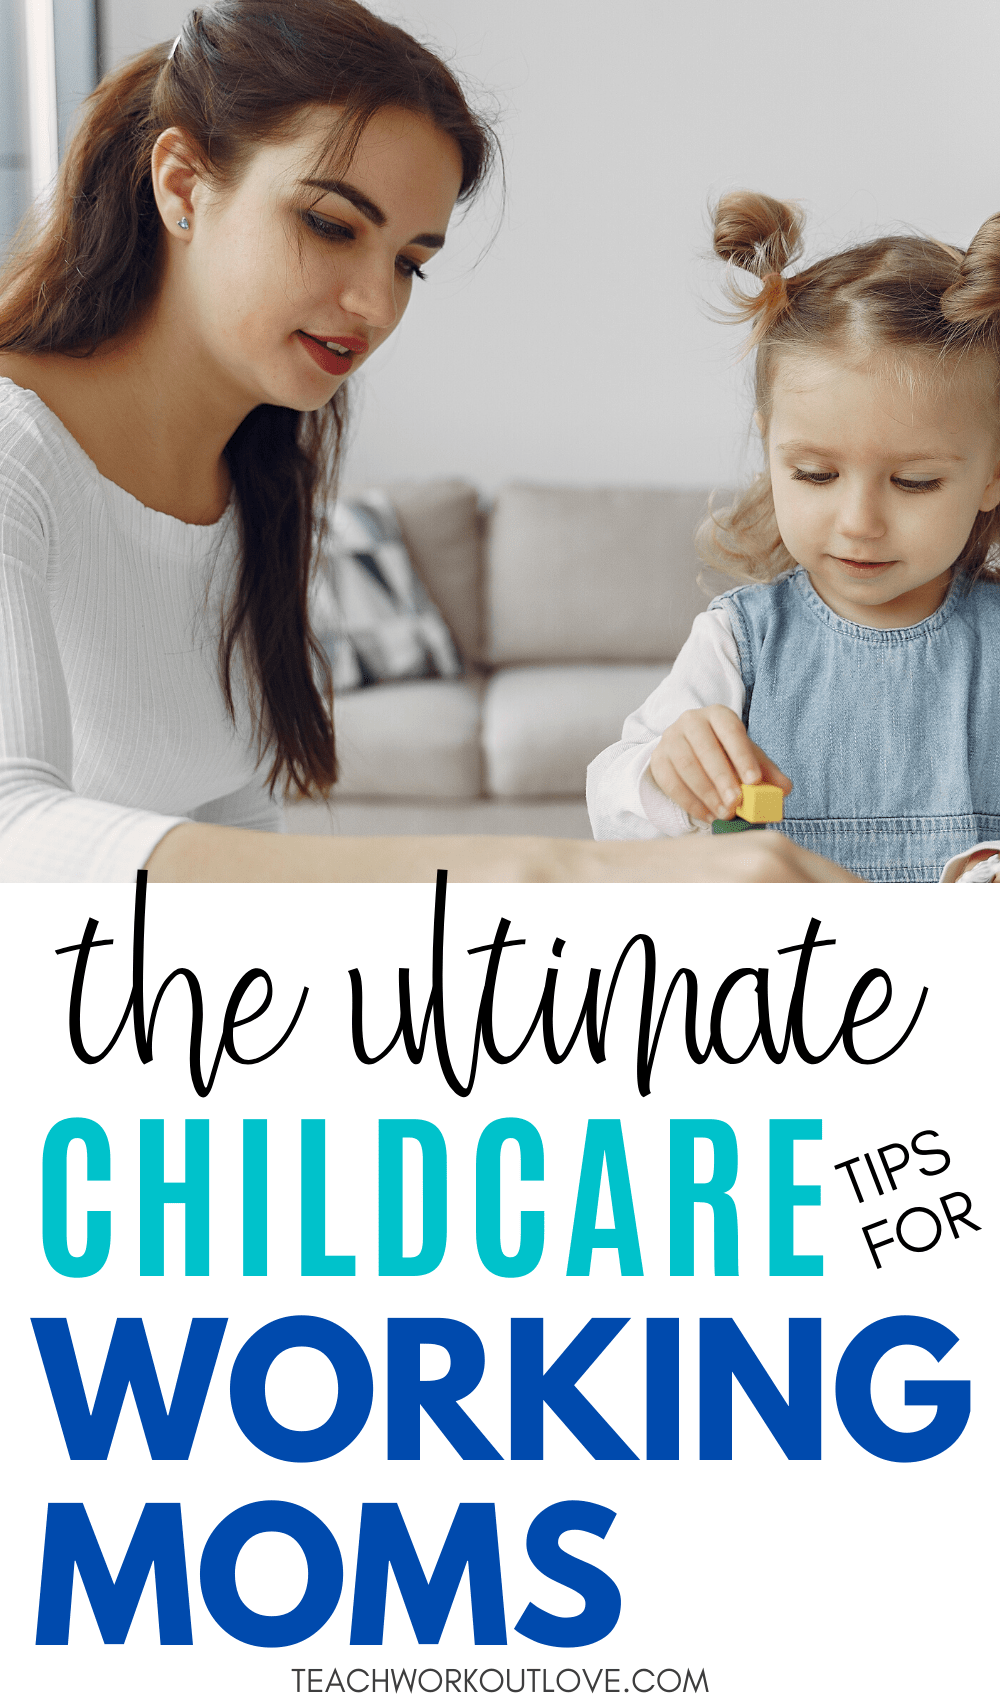 Are you a working mom who needs child care? Check out this 10 effective child care tips for working moms to balance your work and child care.